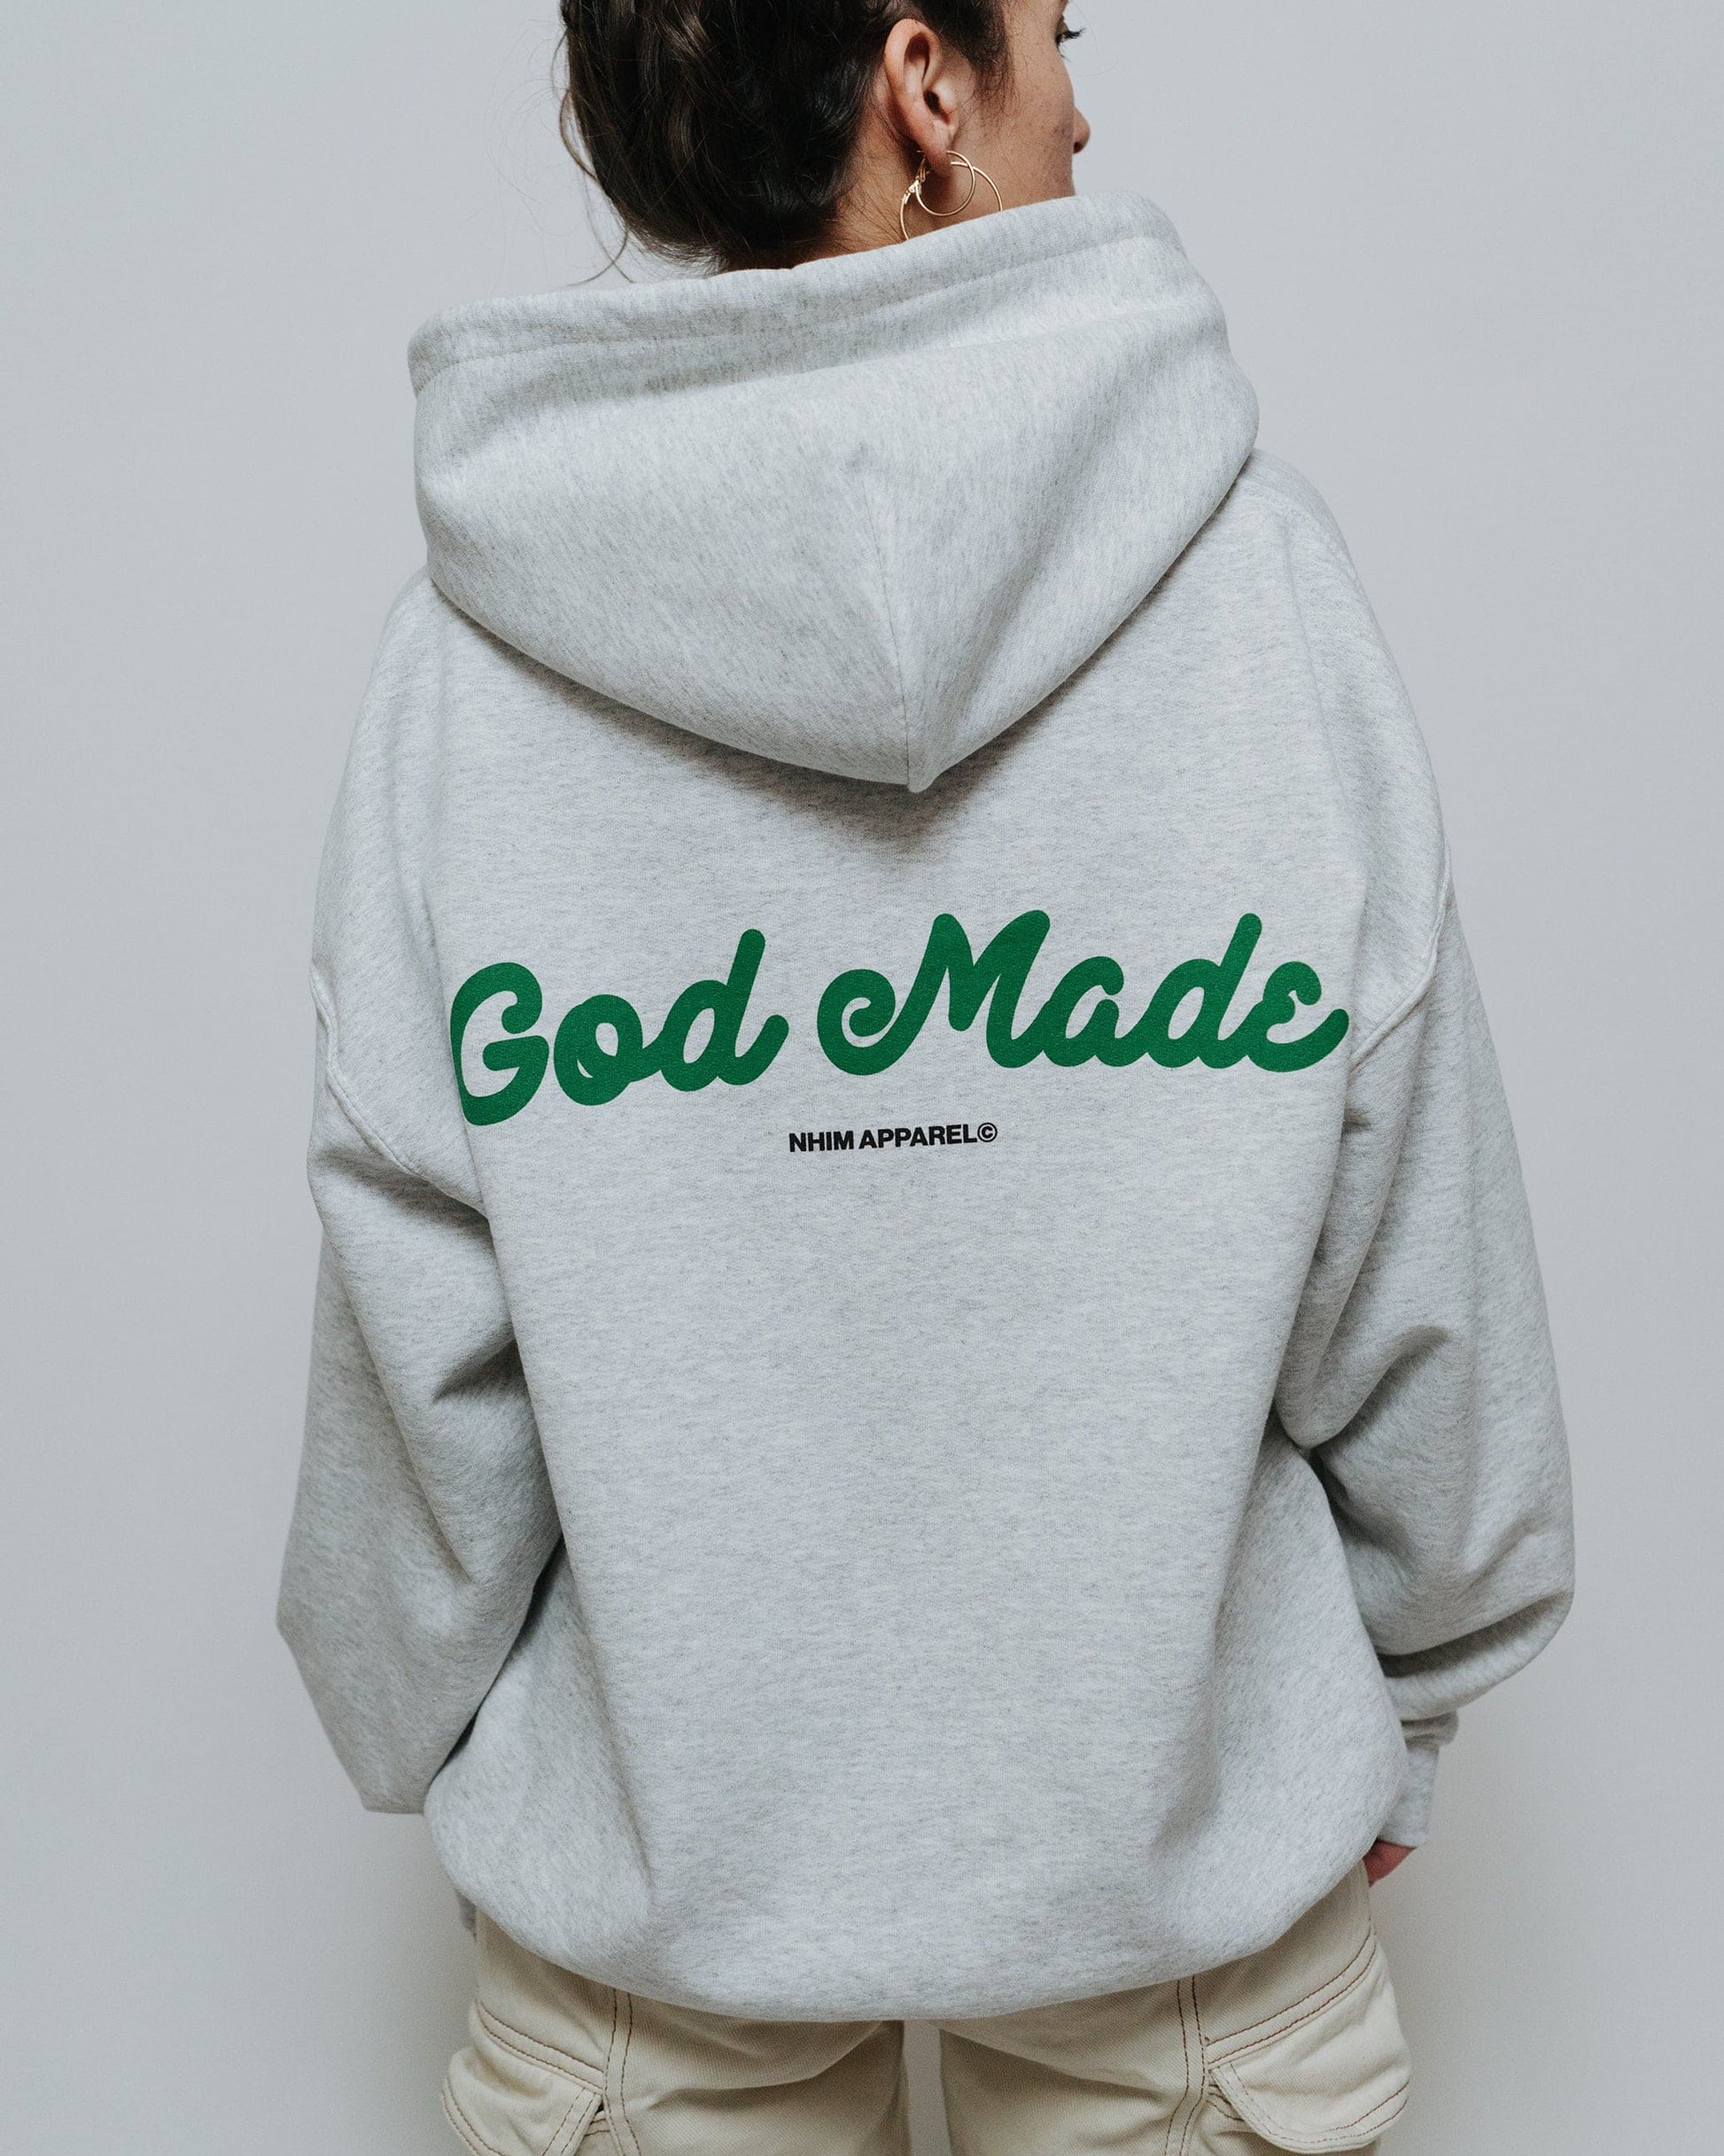 GOD MADE hoodie in ash by NHIM Apparel Christian clothing brand